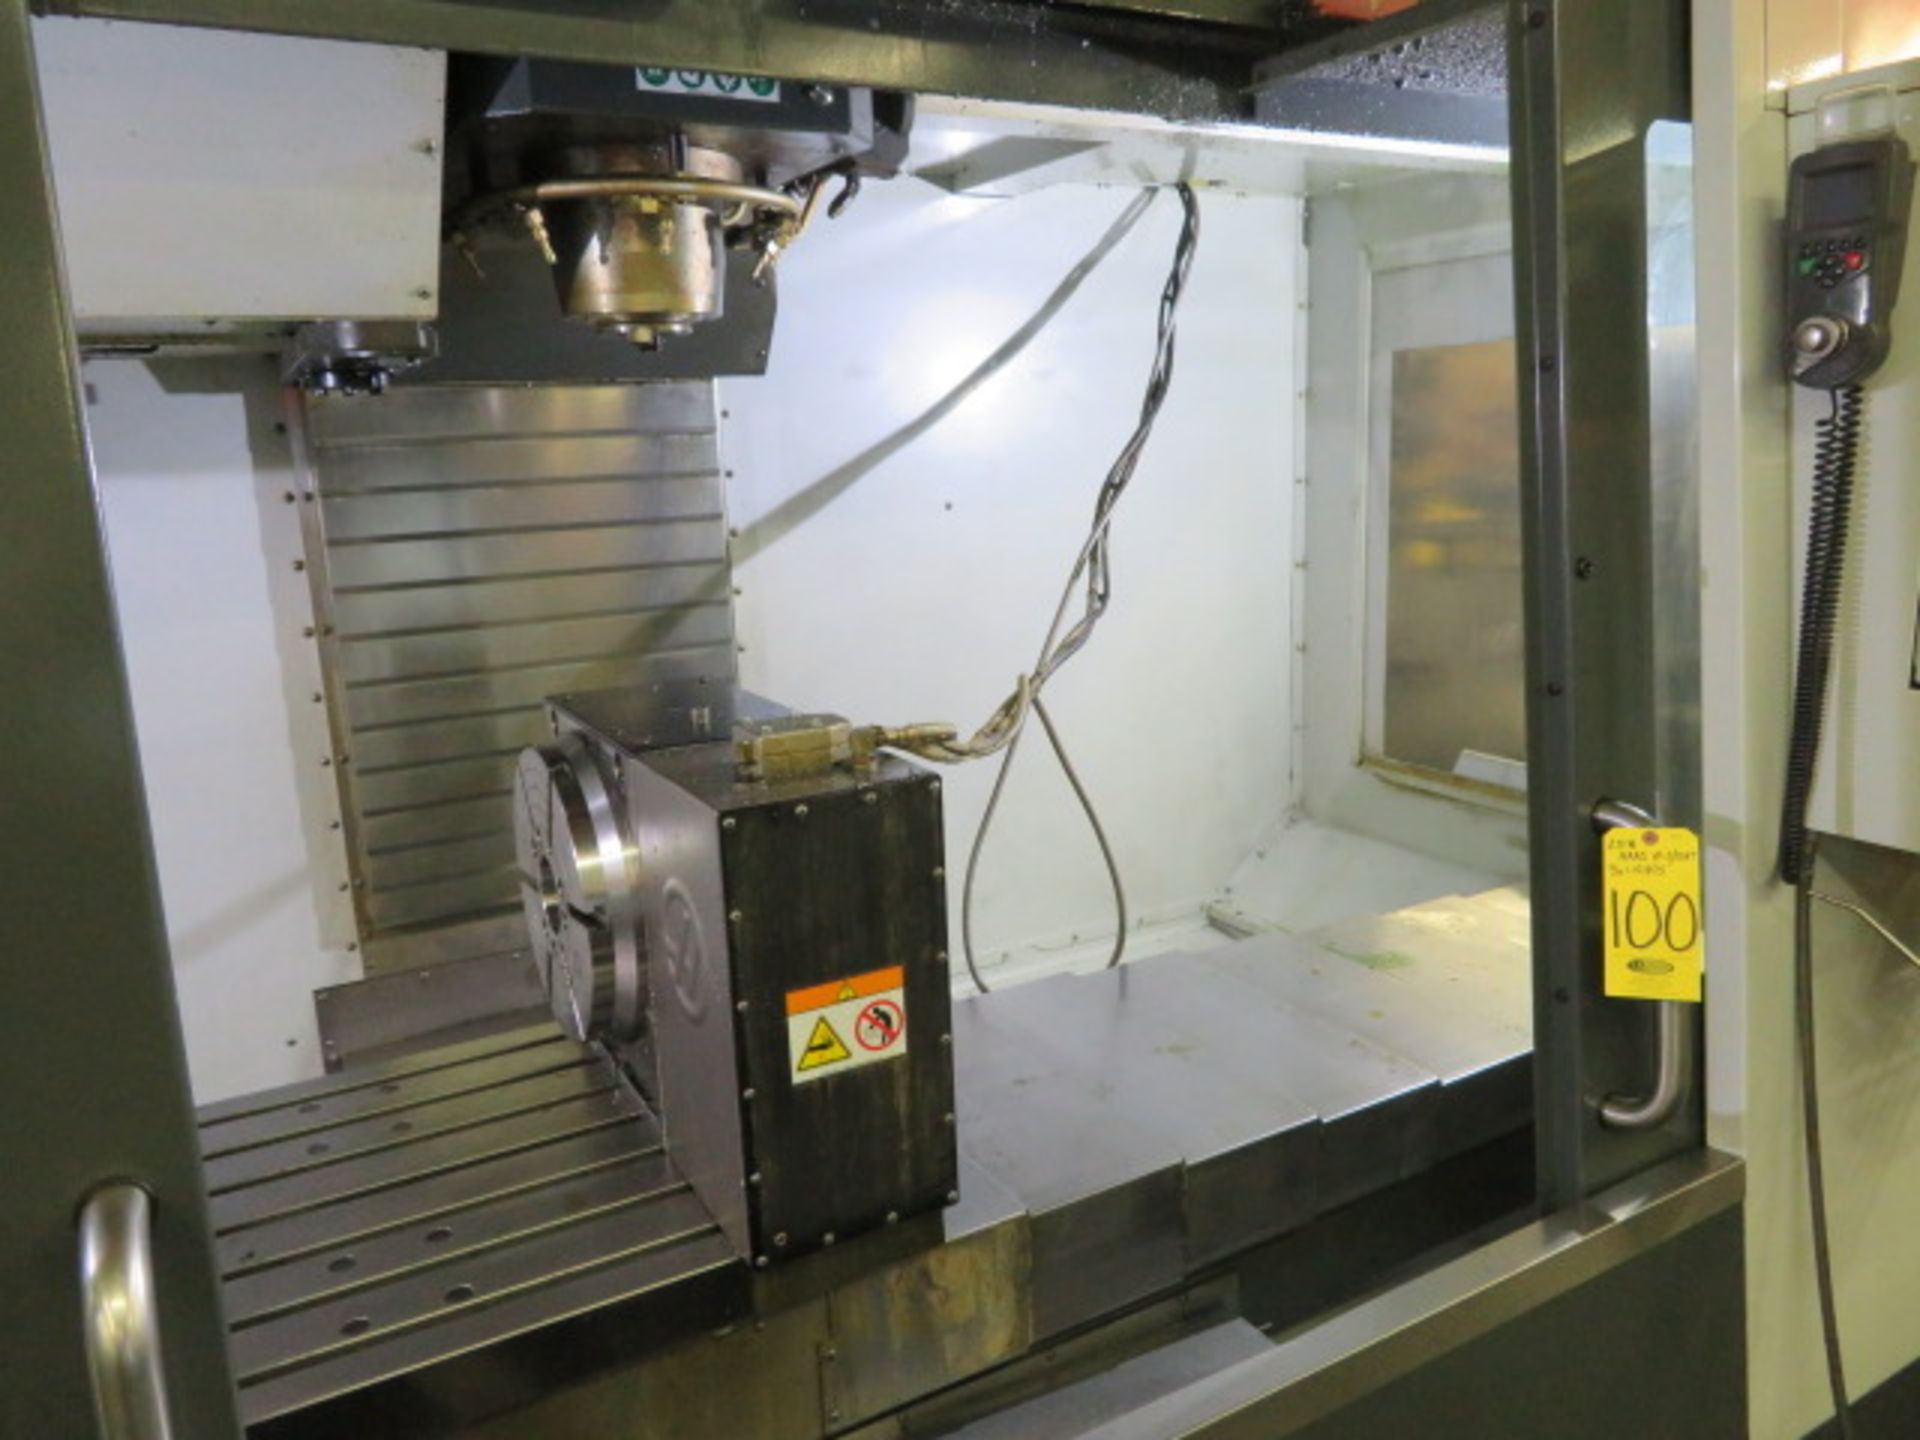 2018 HAAS VF5-50XT CNC Vertical Machining Center, S/N 1151875, HAAS Control, 4TH AXIS ENABLED - Image 3 of 11